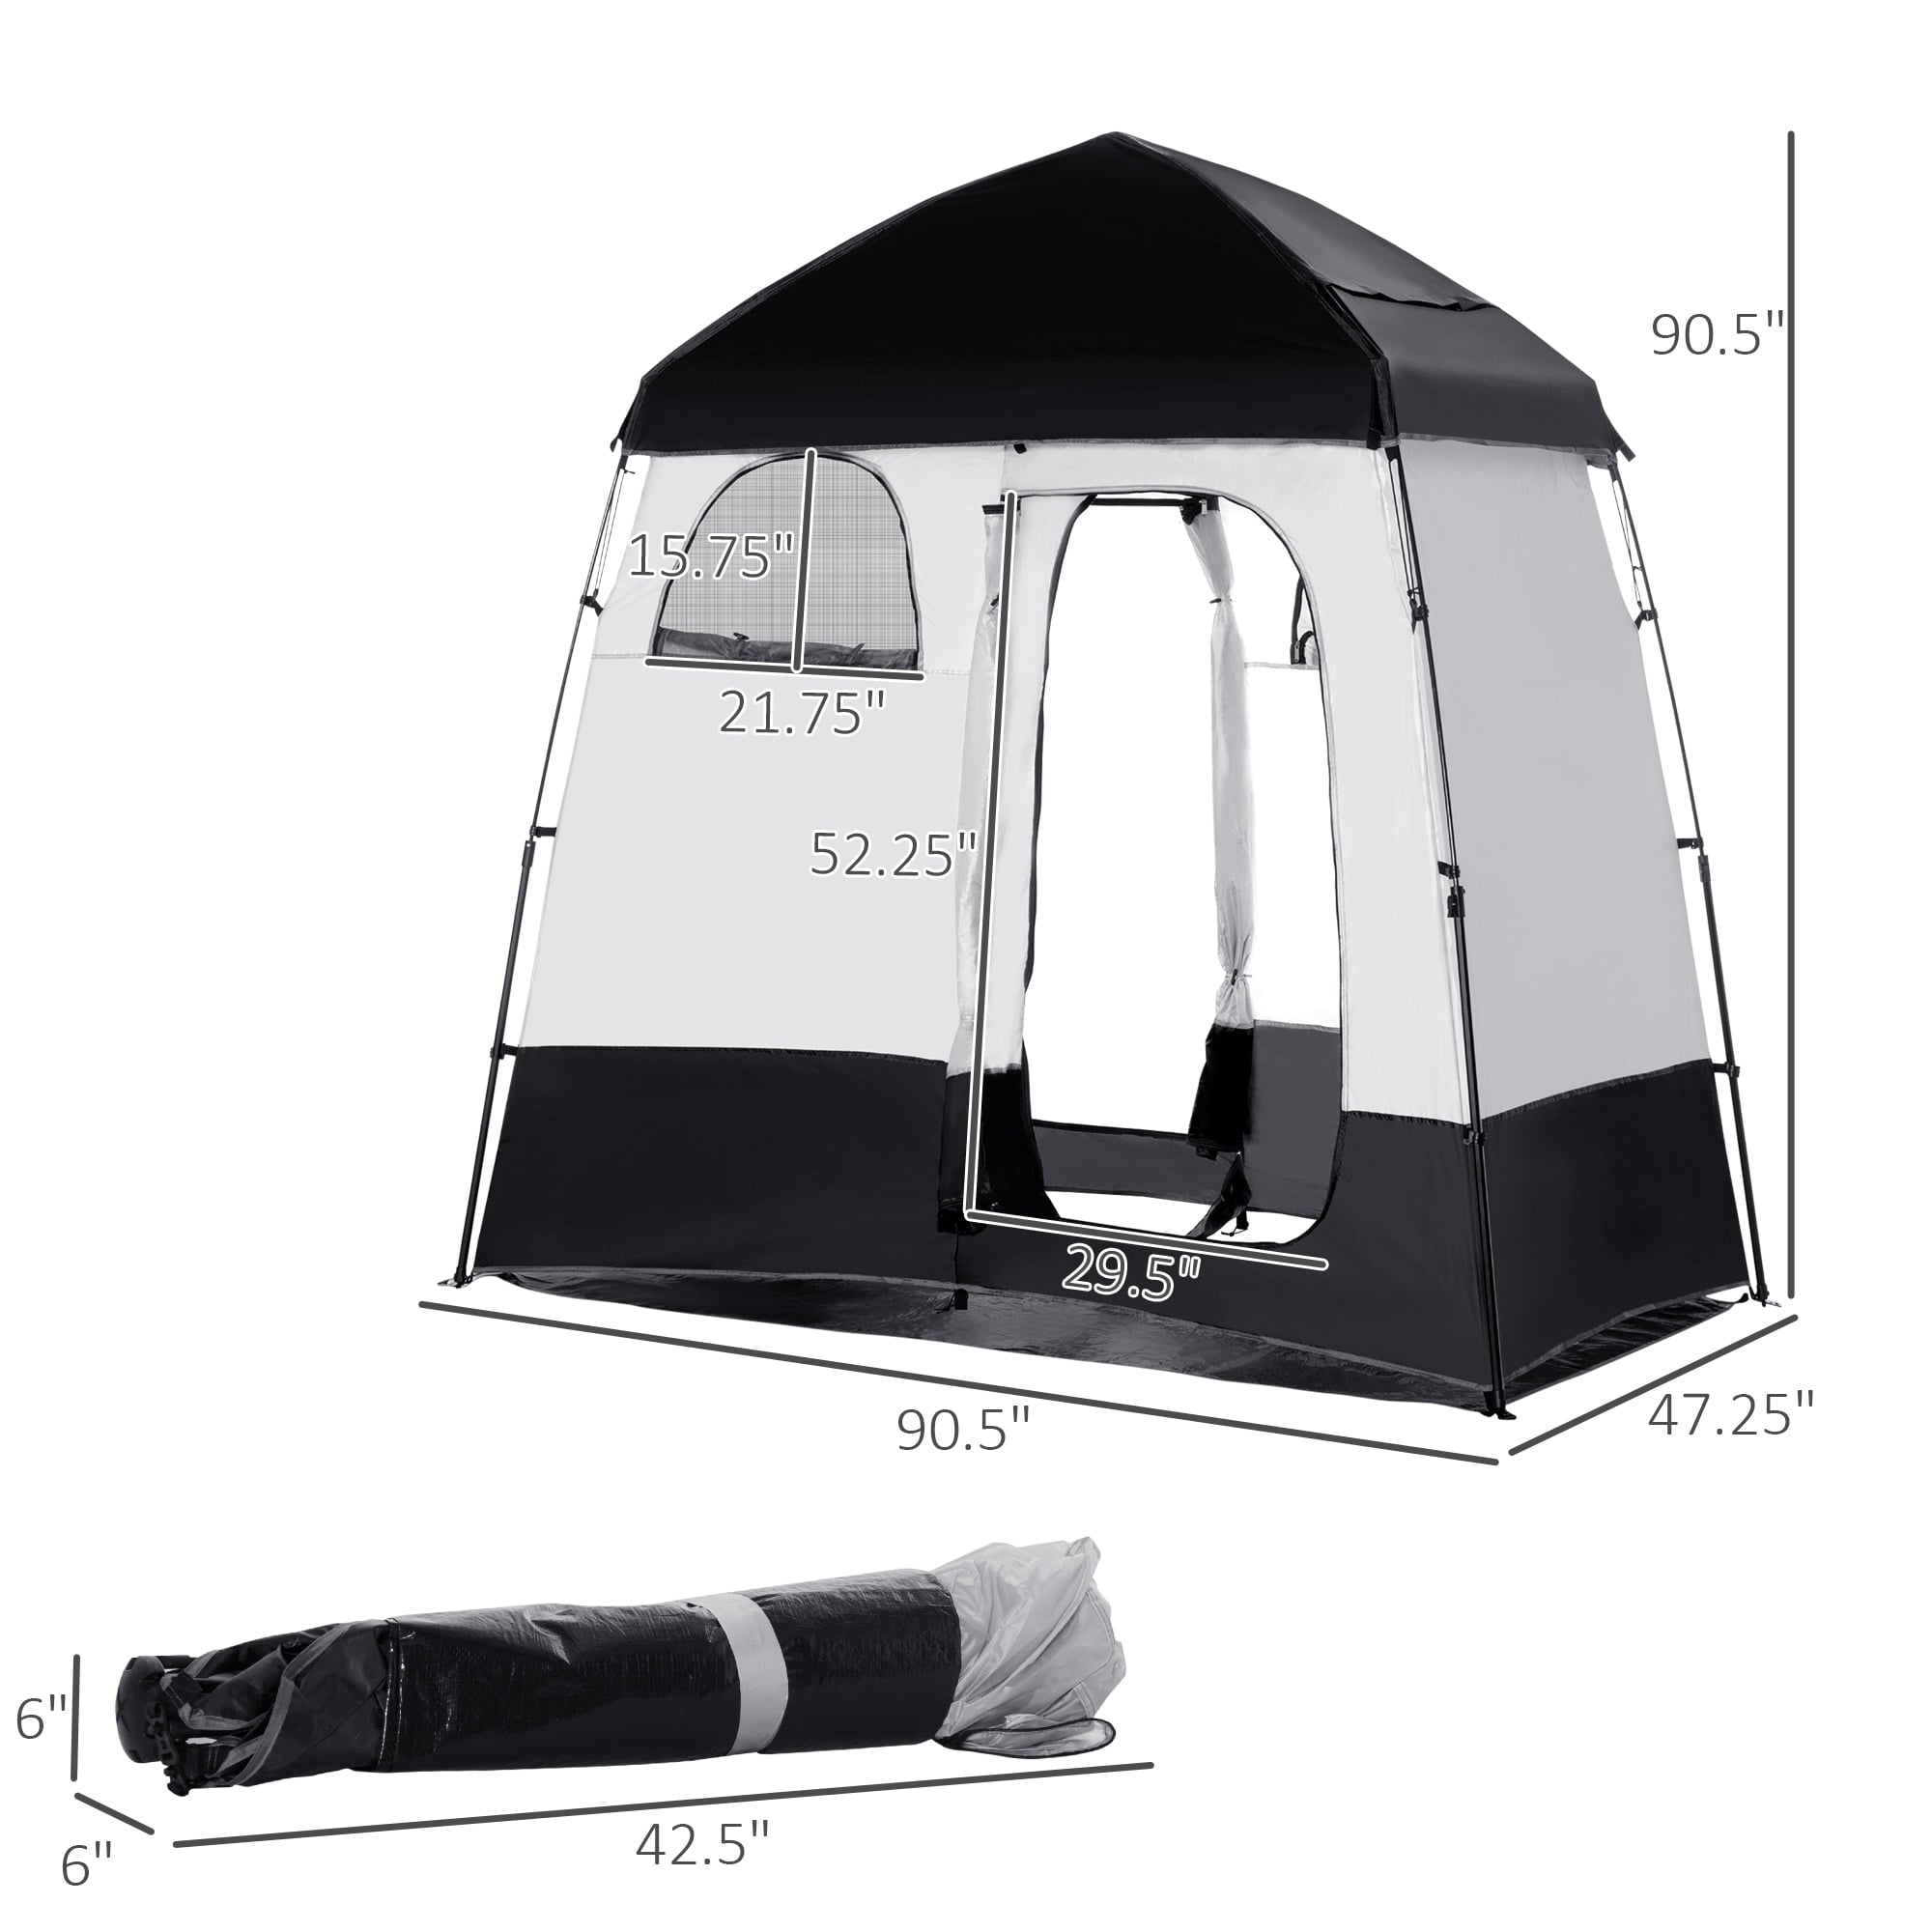 Outsunny Shower Tent, Pop Up Privacy Shelter for Camping, Dressing Changing Room, Portable Instant Outdoor Shower Tent Enclosure w/ 2 Rooms, Shower Bag, Floor and Carrying Bag, Black